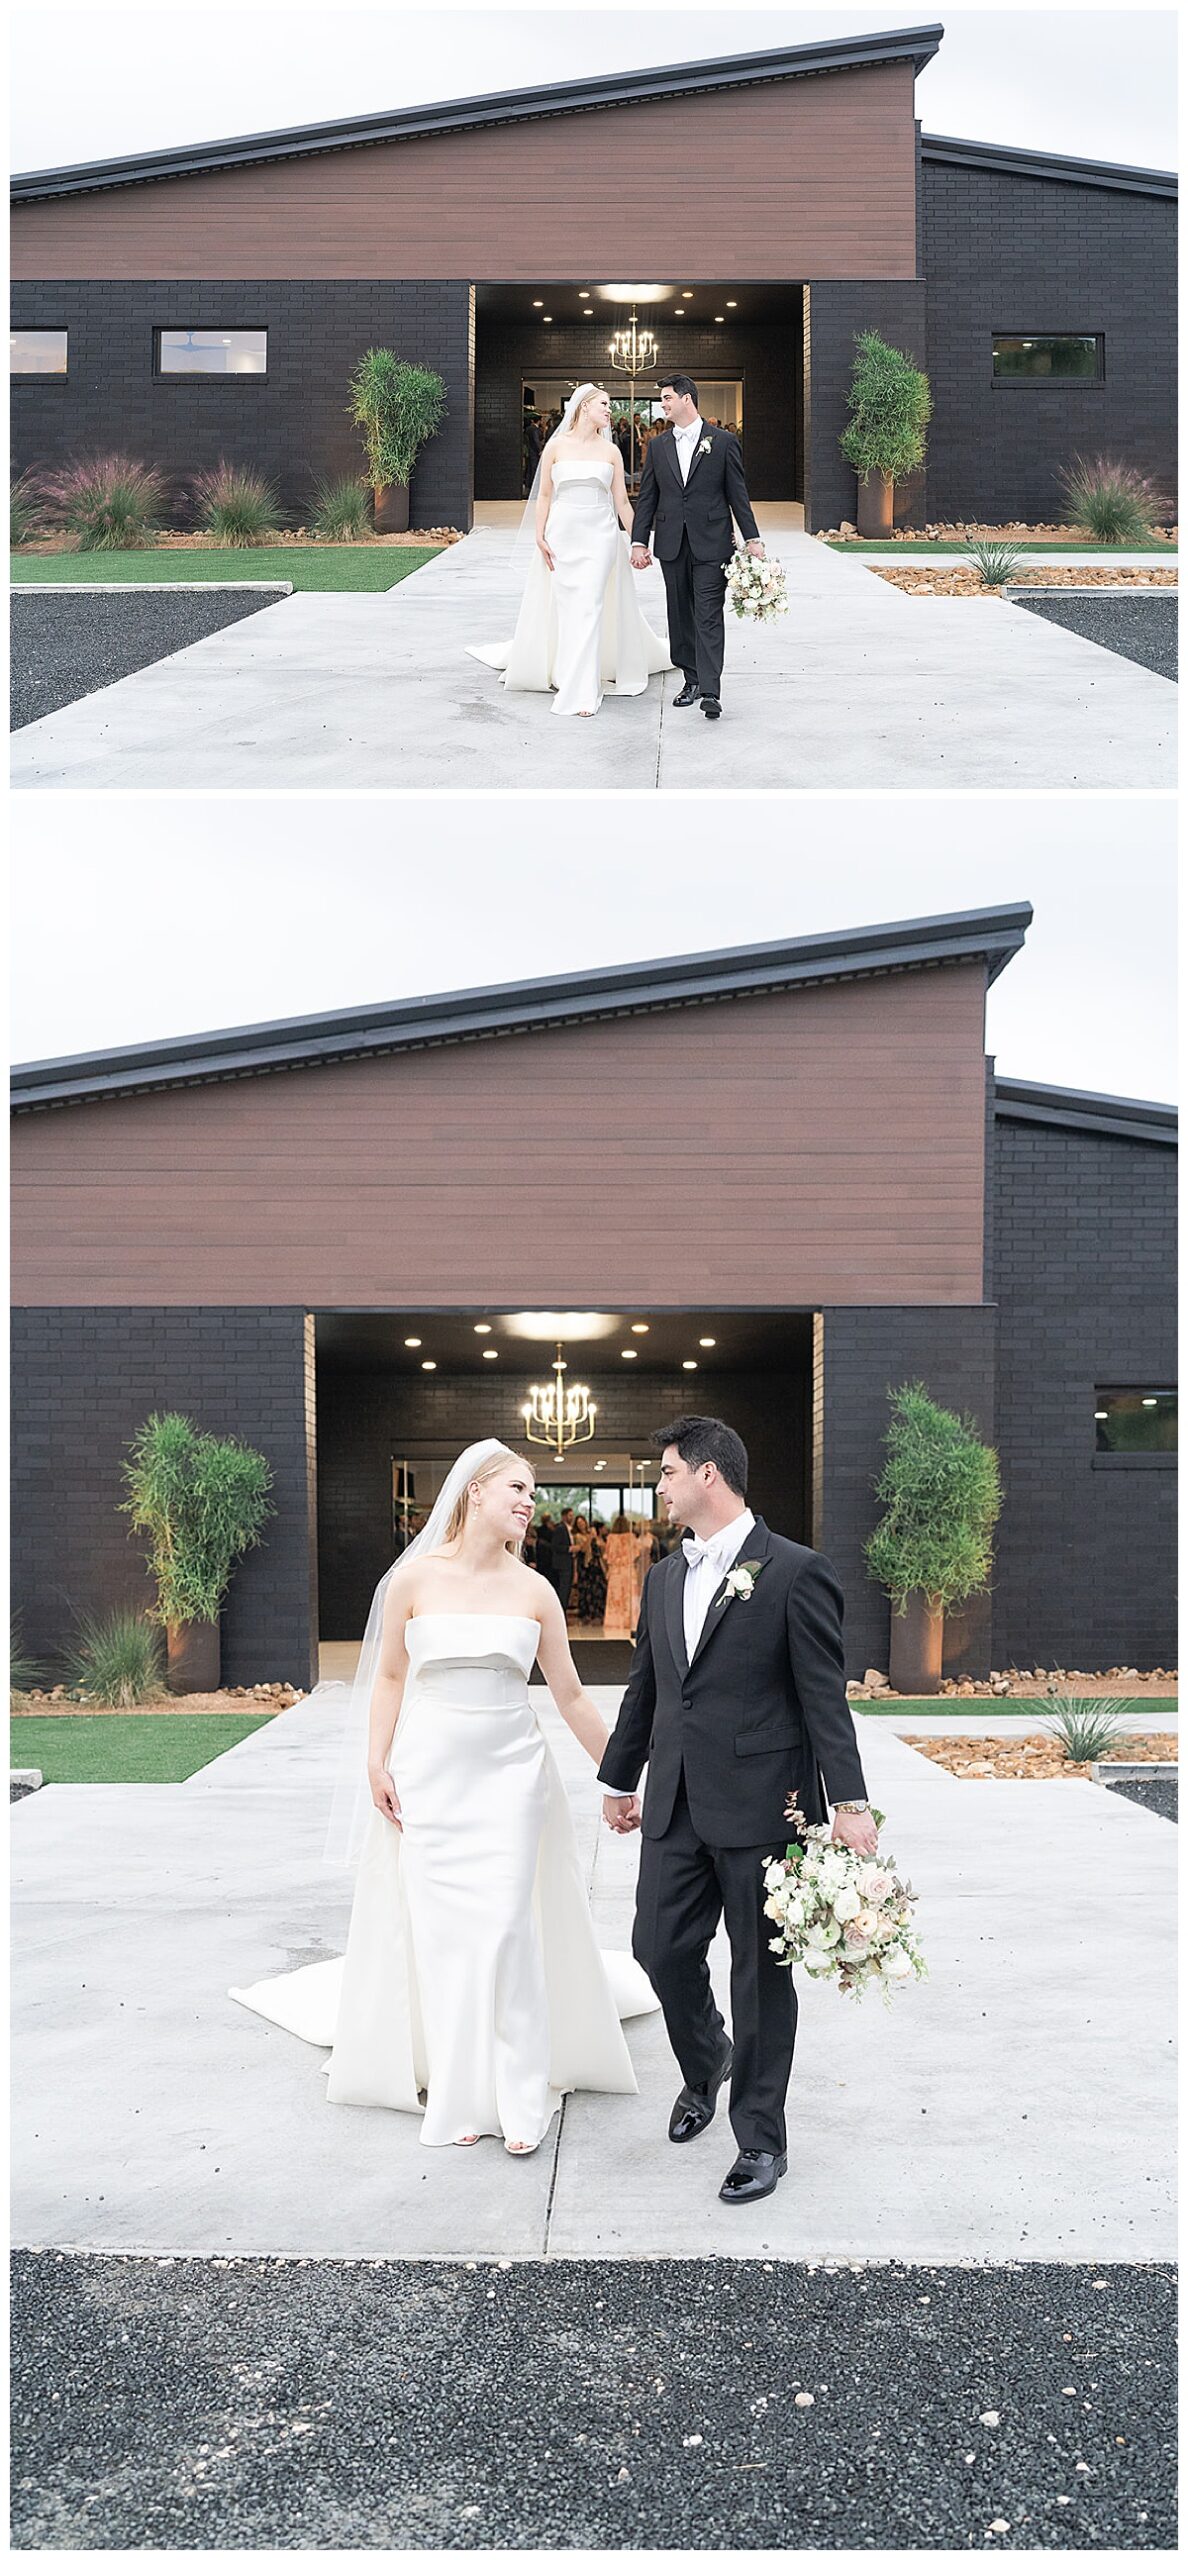 Couple hold hands and walk together at Houston Wedding Venue